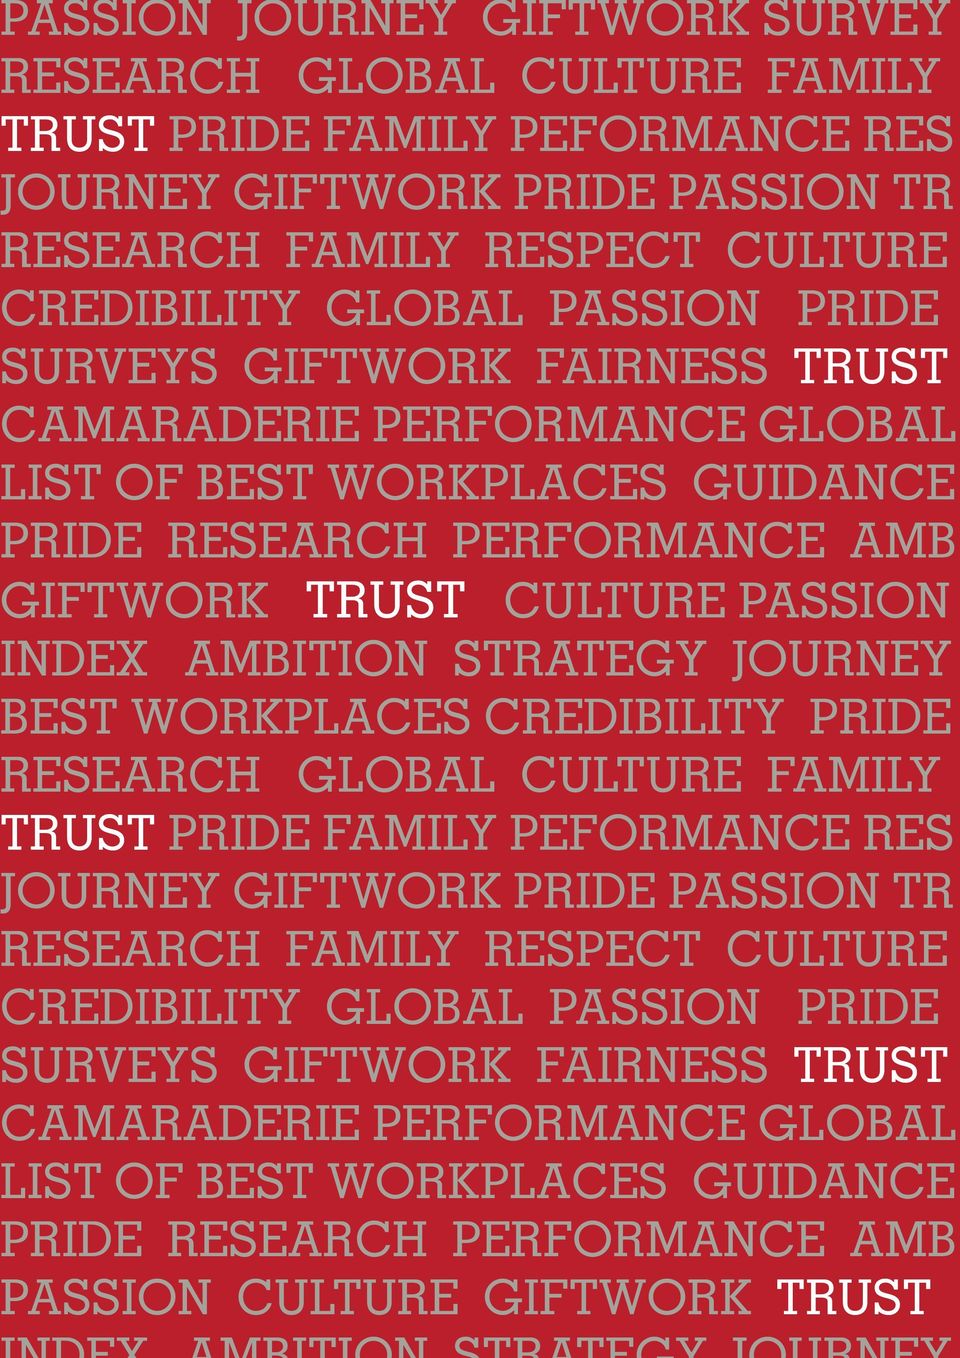 AMBITION STRATEGY JOURNEY BEST WORKPLACES CREDIBILITY PRIDE RESEARCH GLOBAL CULTURE FAMILY TRUST PRIDE FAMILY PEFORMANCE RES JOURNEY GIFTWORK PRIDE PASSION TR RESEARCH FAMILY RESPECT